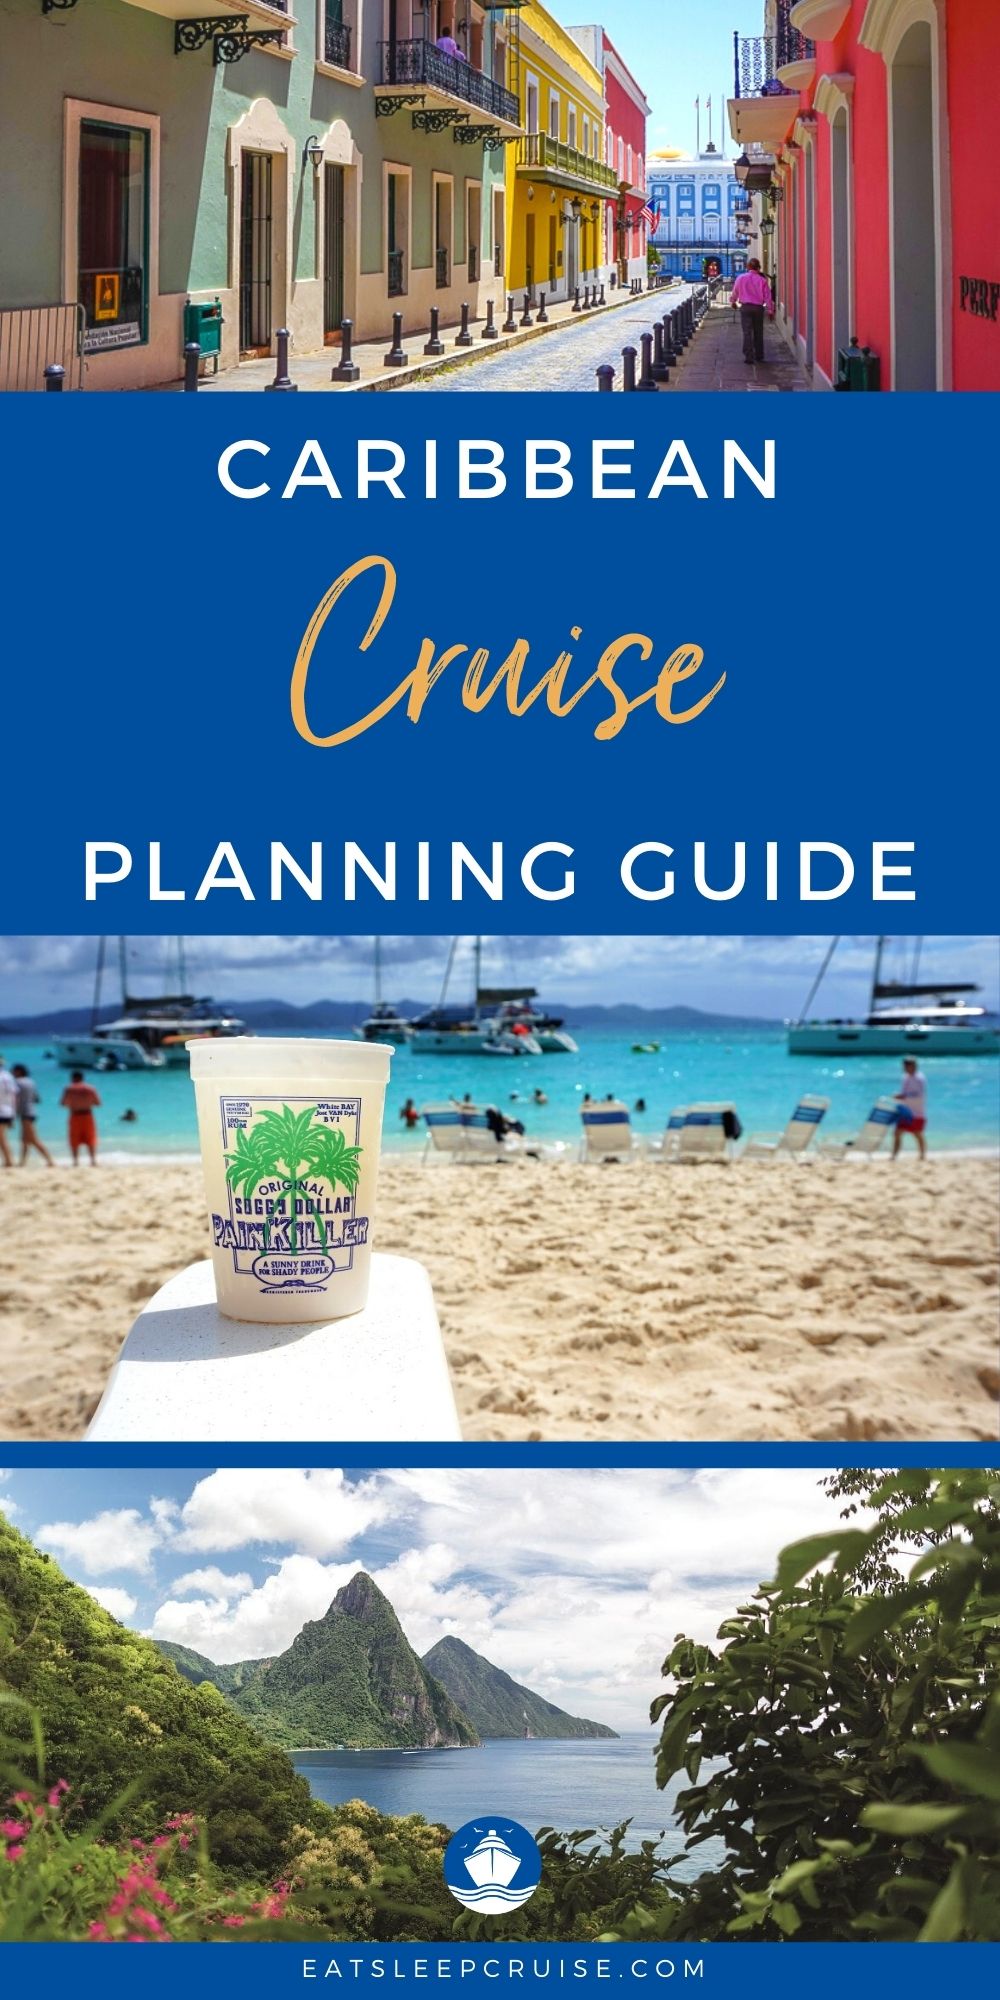 Caribbean Cruise Planning Guide